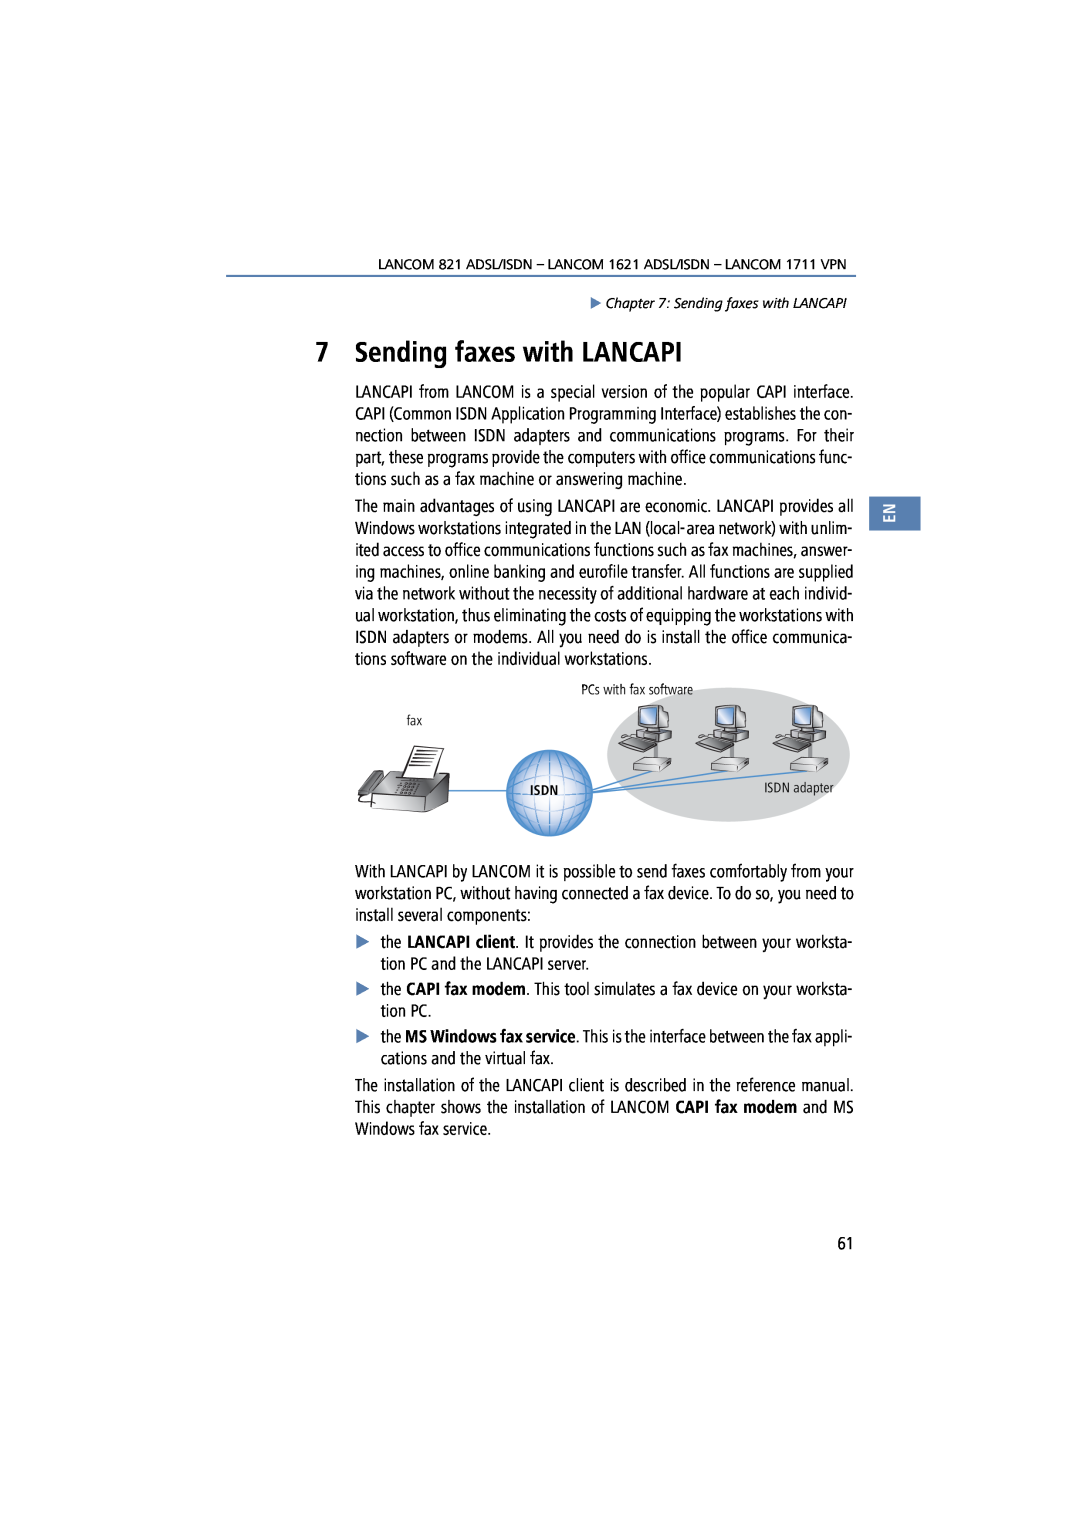 Lancom Systems 1711, 821, 1621 manual Sending faxes with LANCAPI, Isdn 